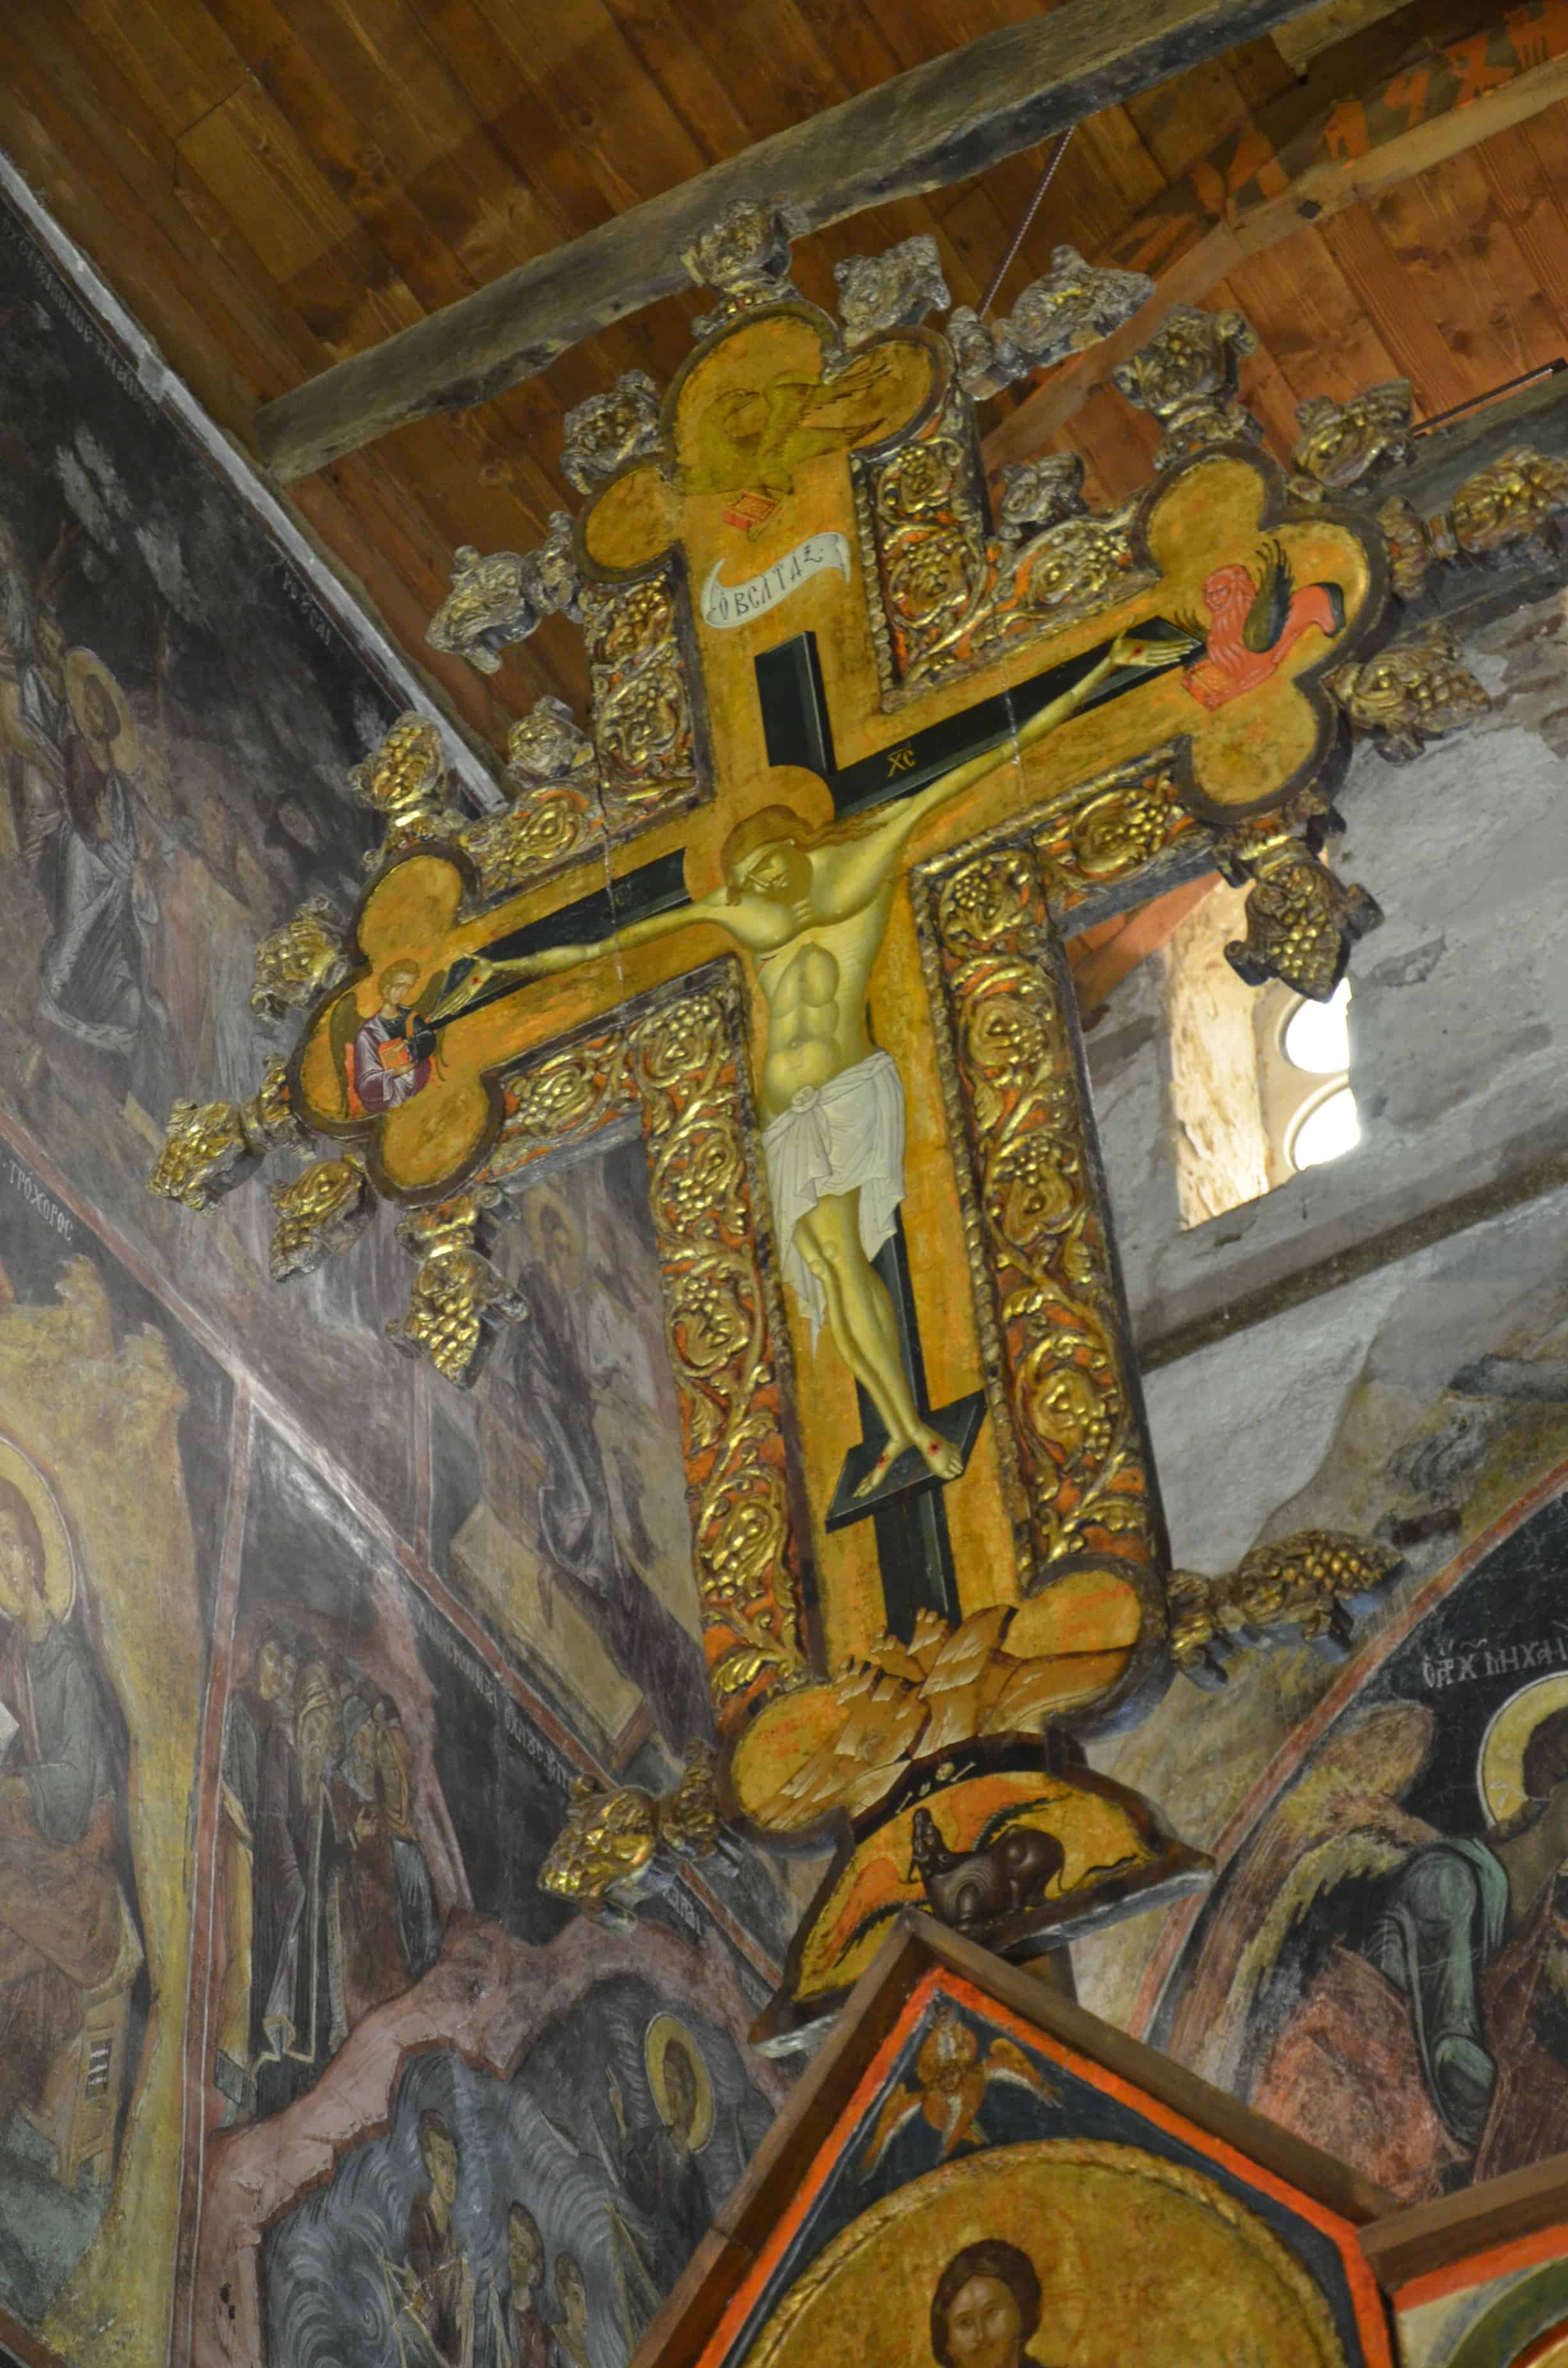 Cross on the iconostasis in the nave at the Church of Saint Stephen in Nessebar, Bulgaria